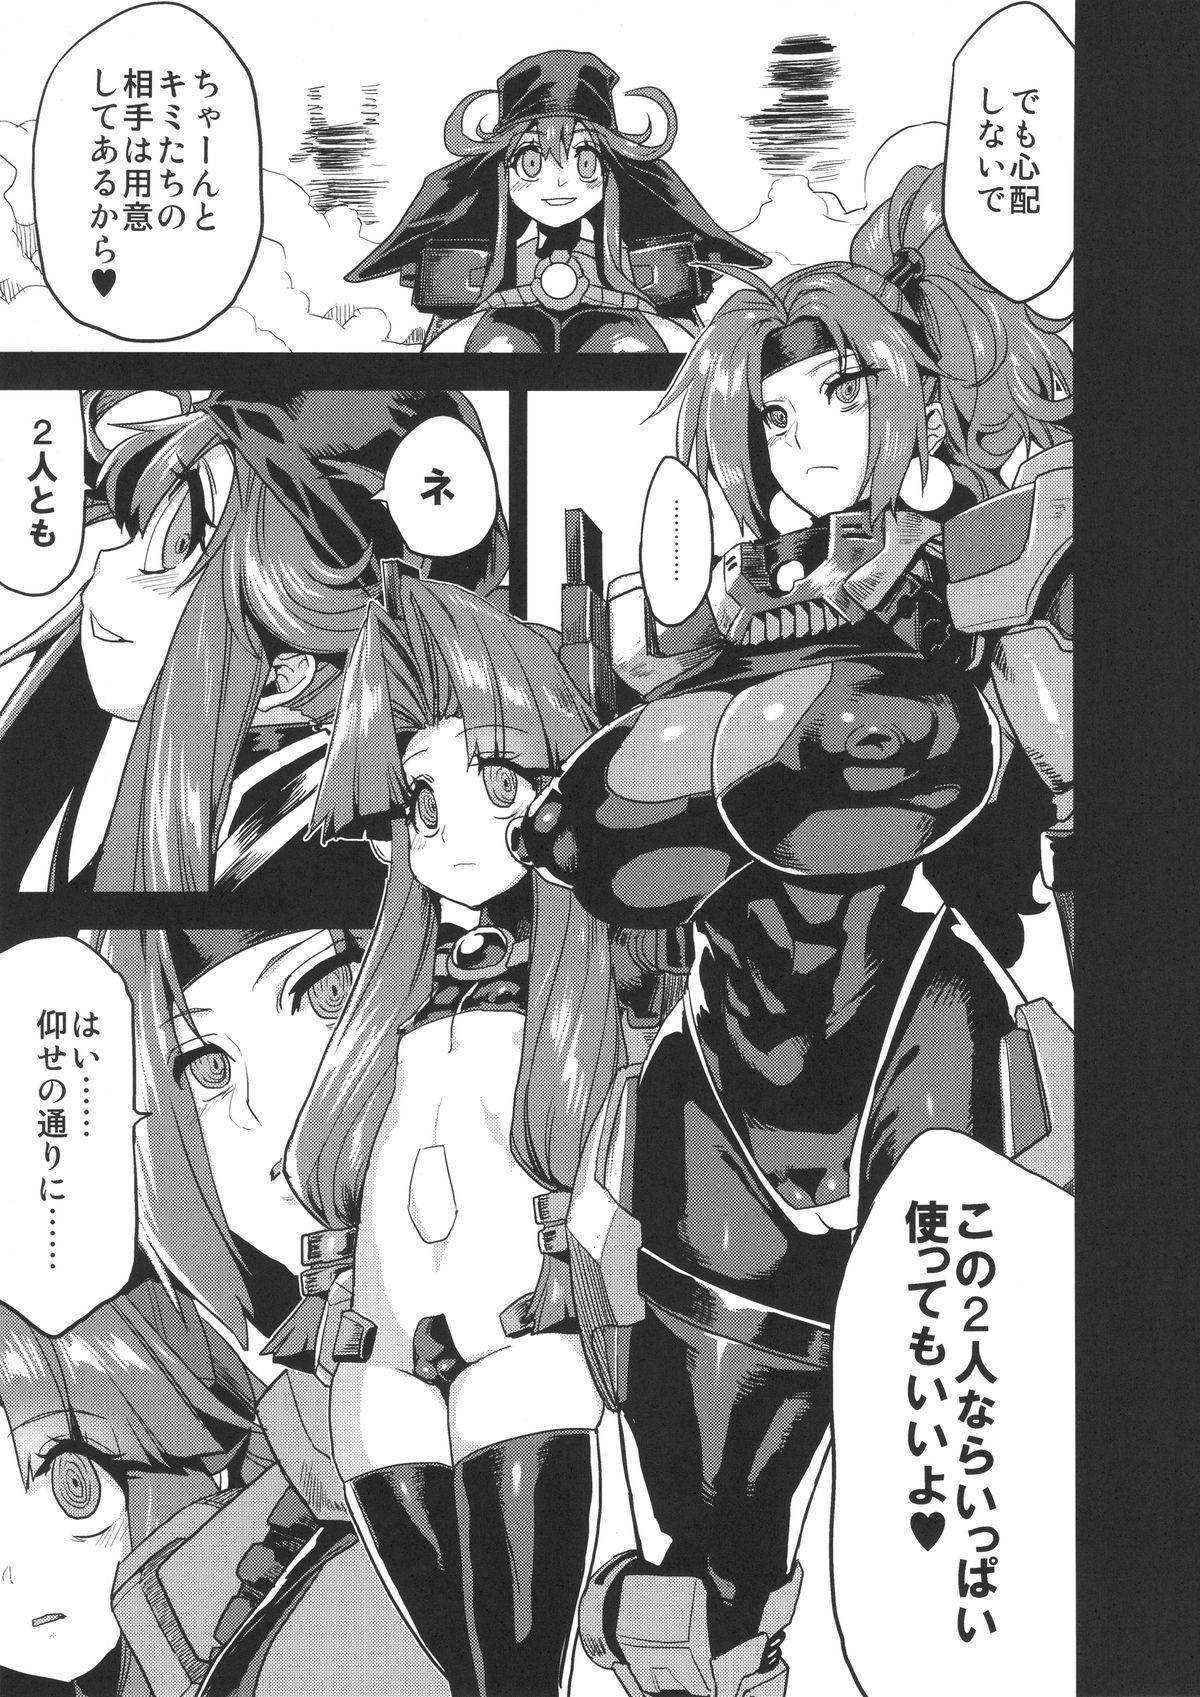 Cheating Hentai Marionette 4 - Saber marionette Dykes - Page 6